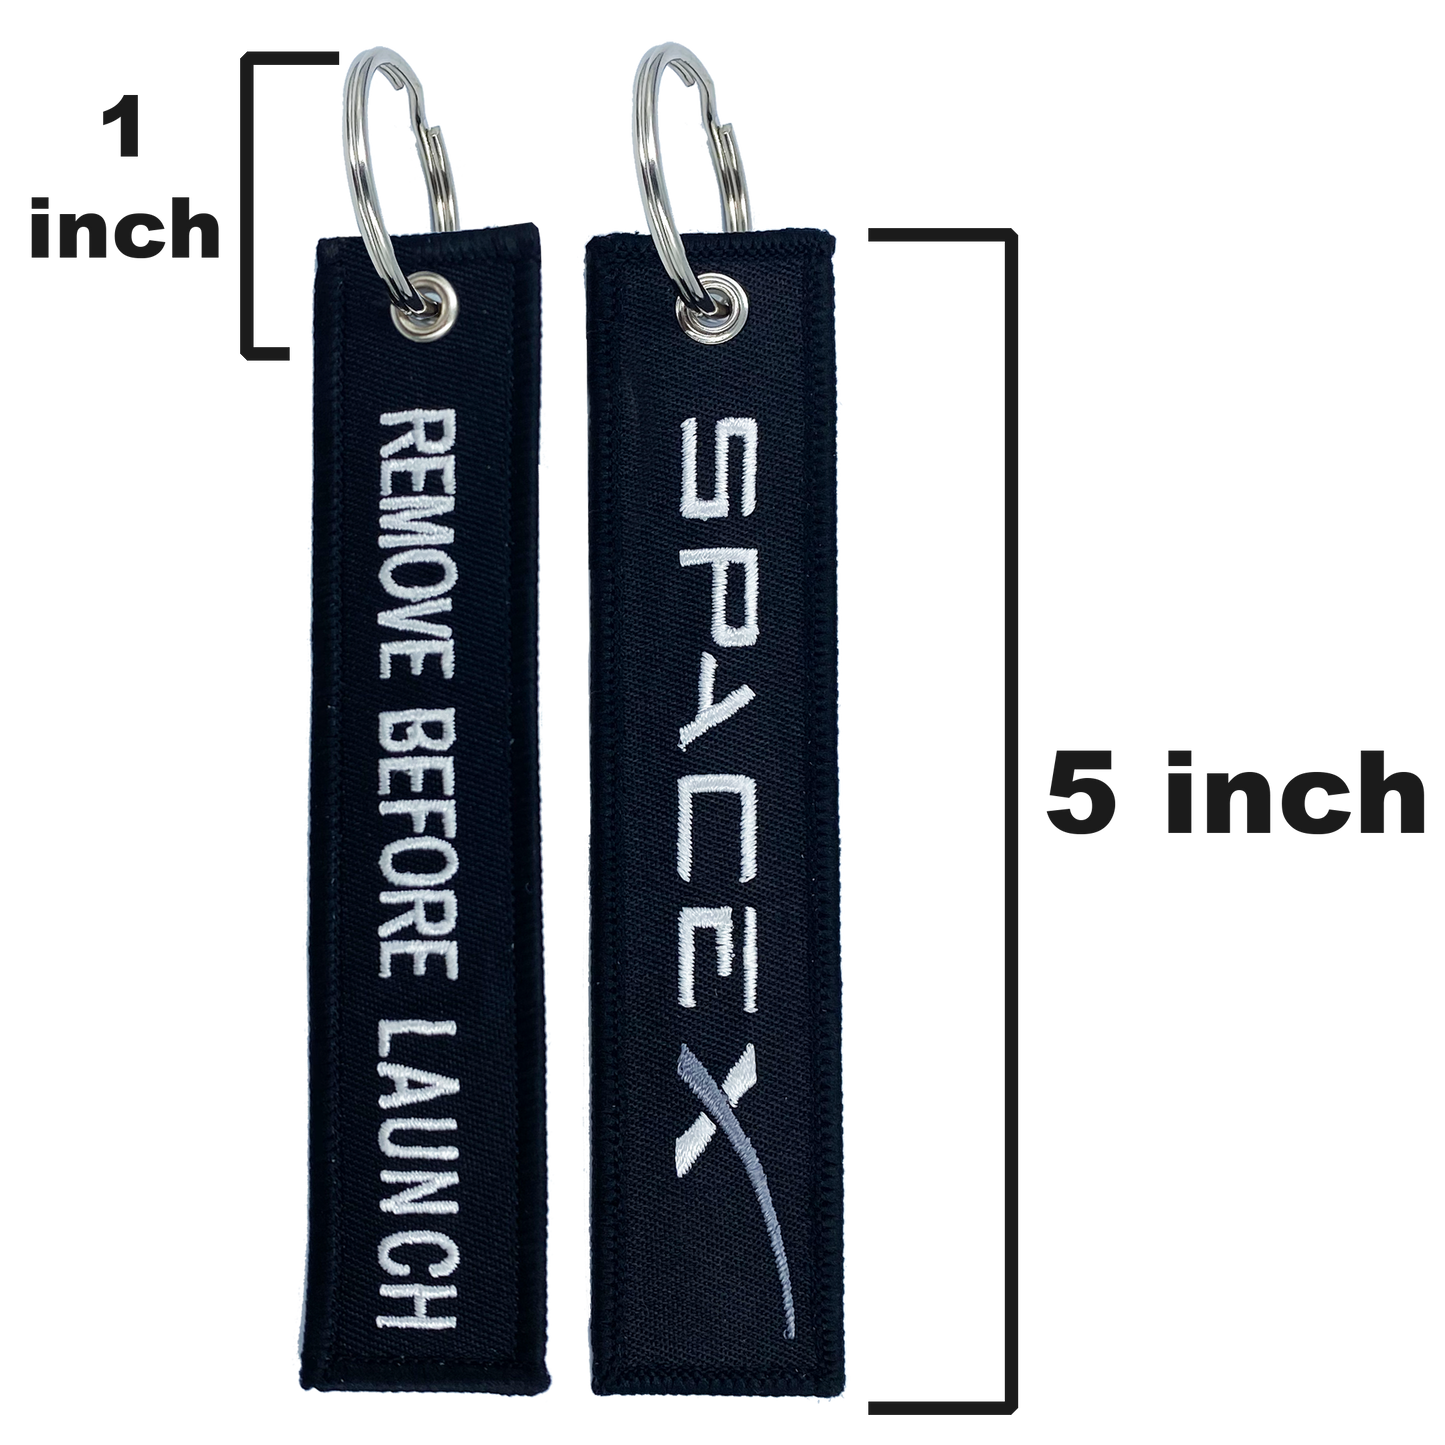 CL4-06 BLACK SpaceX REMOVE BEFORE LAUNCH Luggage Tag zipper pull keychain Space X